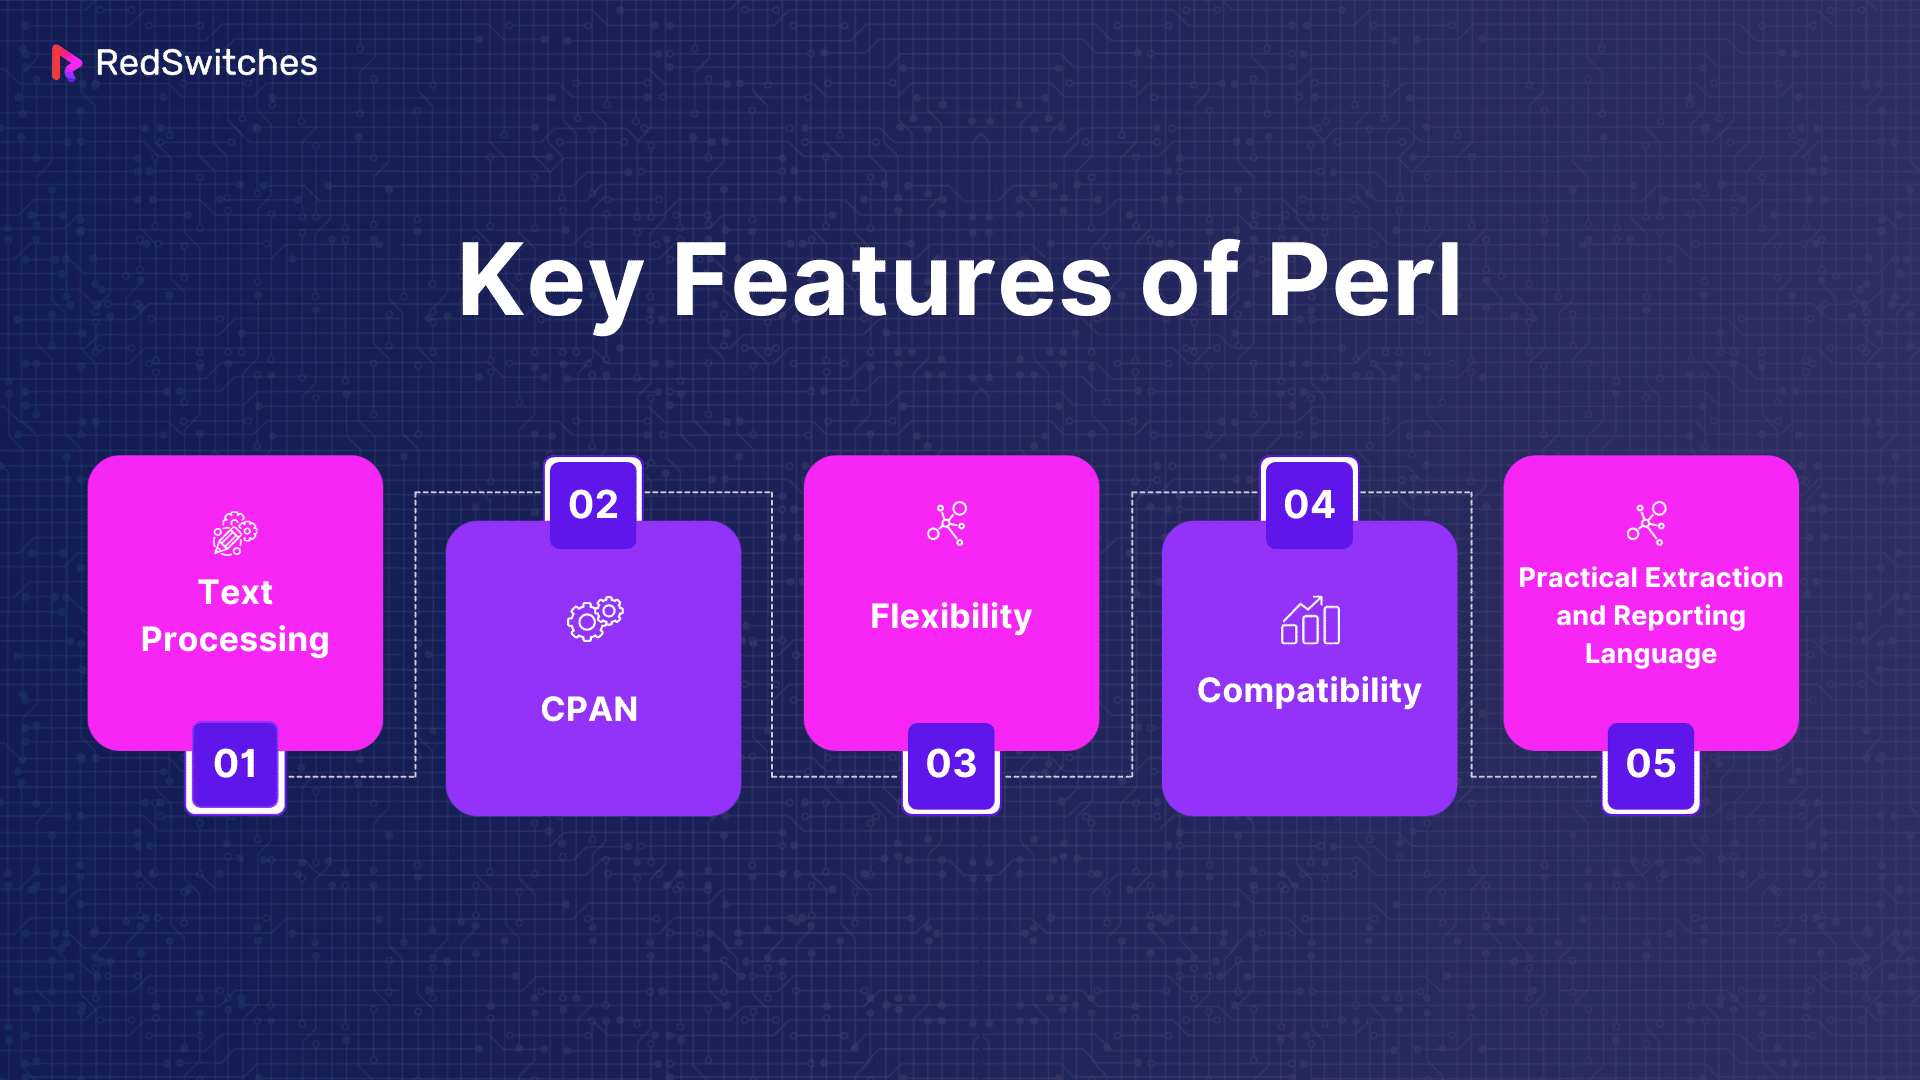 Key Features of Perl